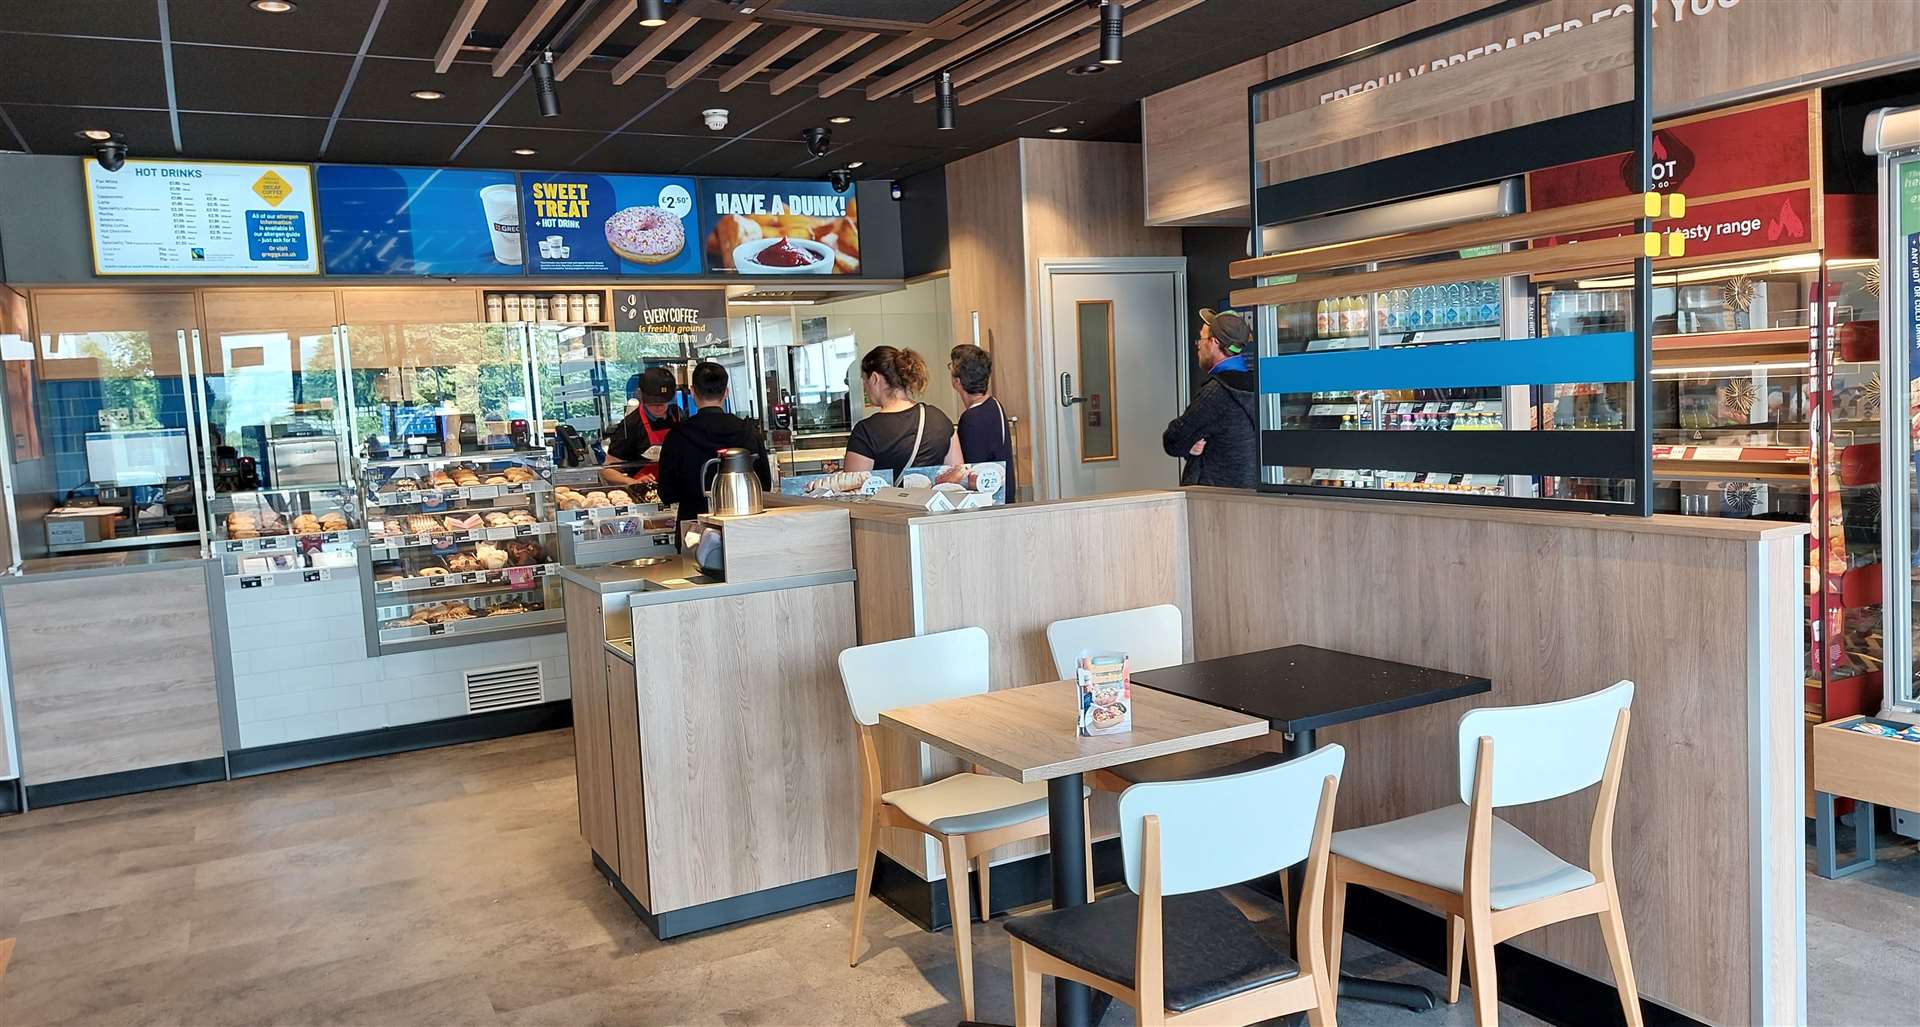 Greggs staff welcomed customers to their new bakery on Saturday